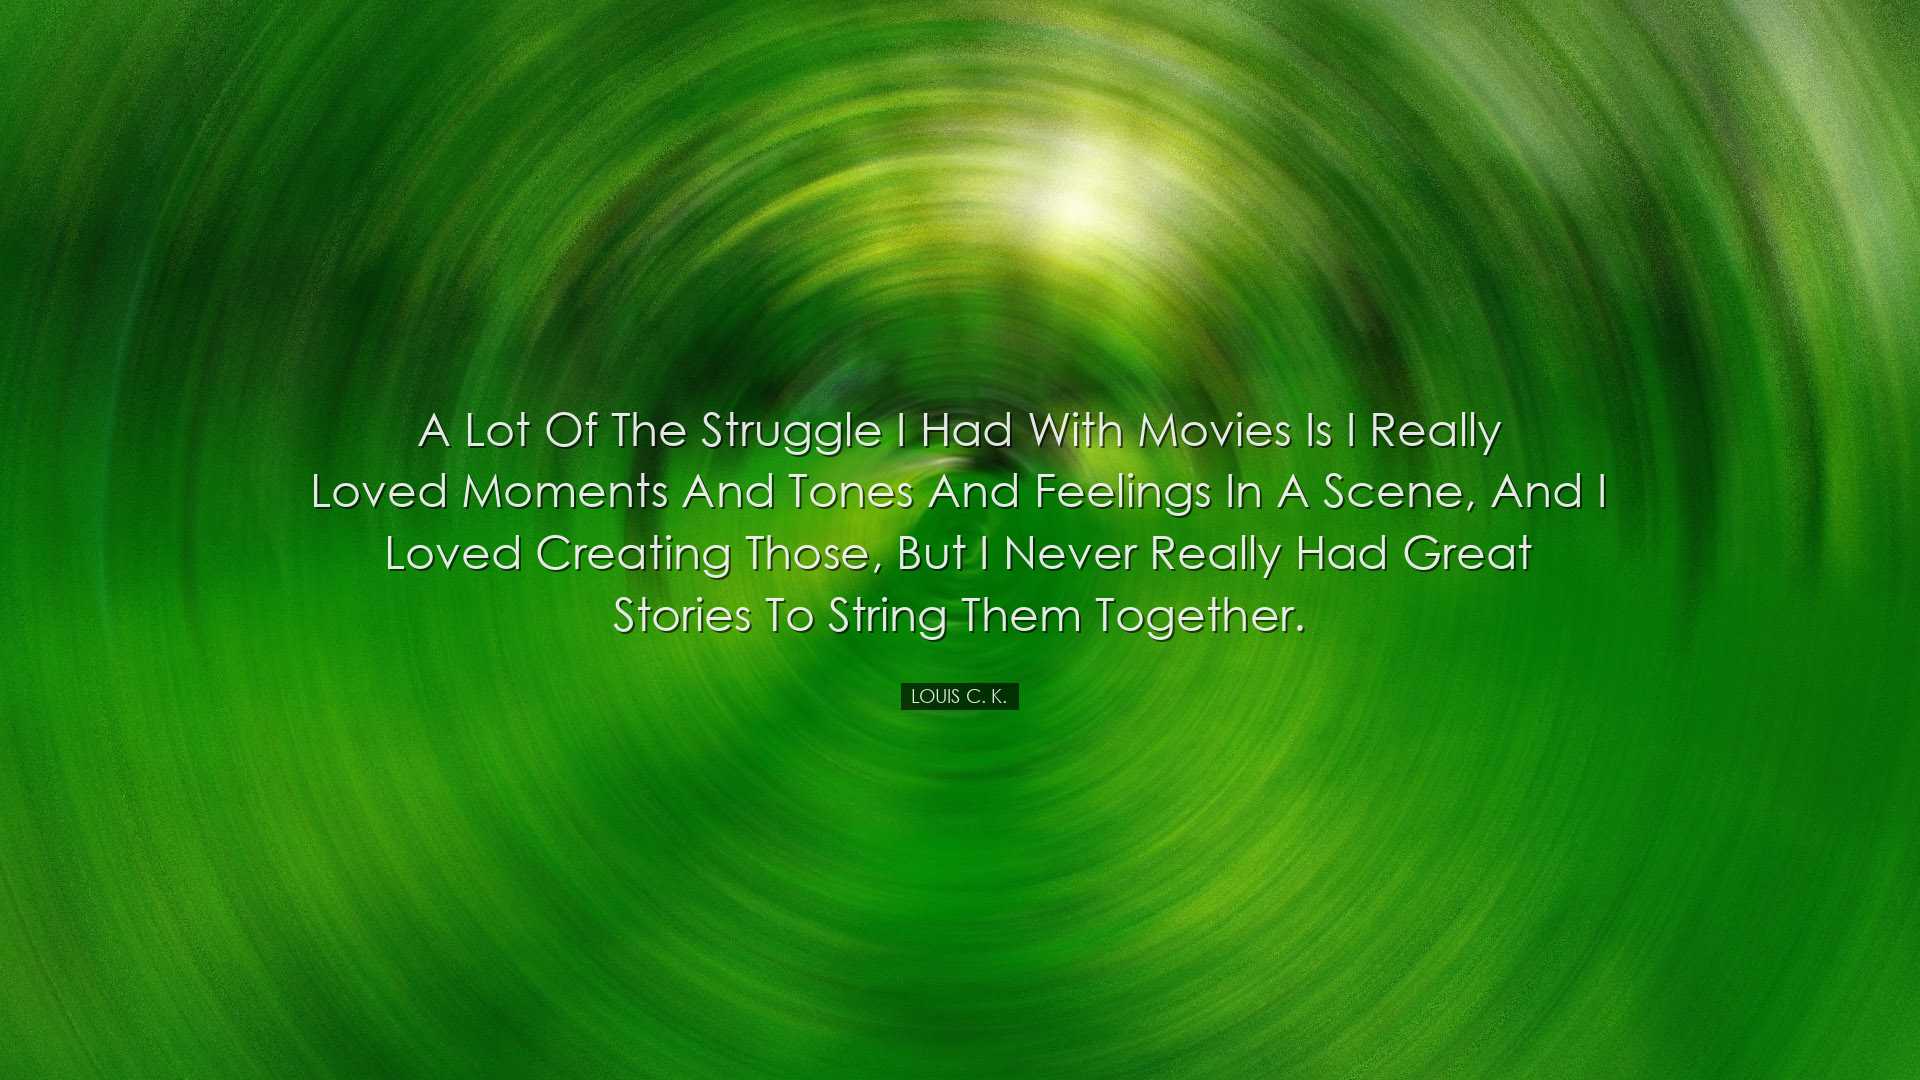 A lot of the struggle I had with movies is I really loved moments